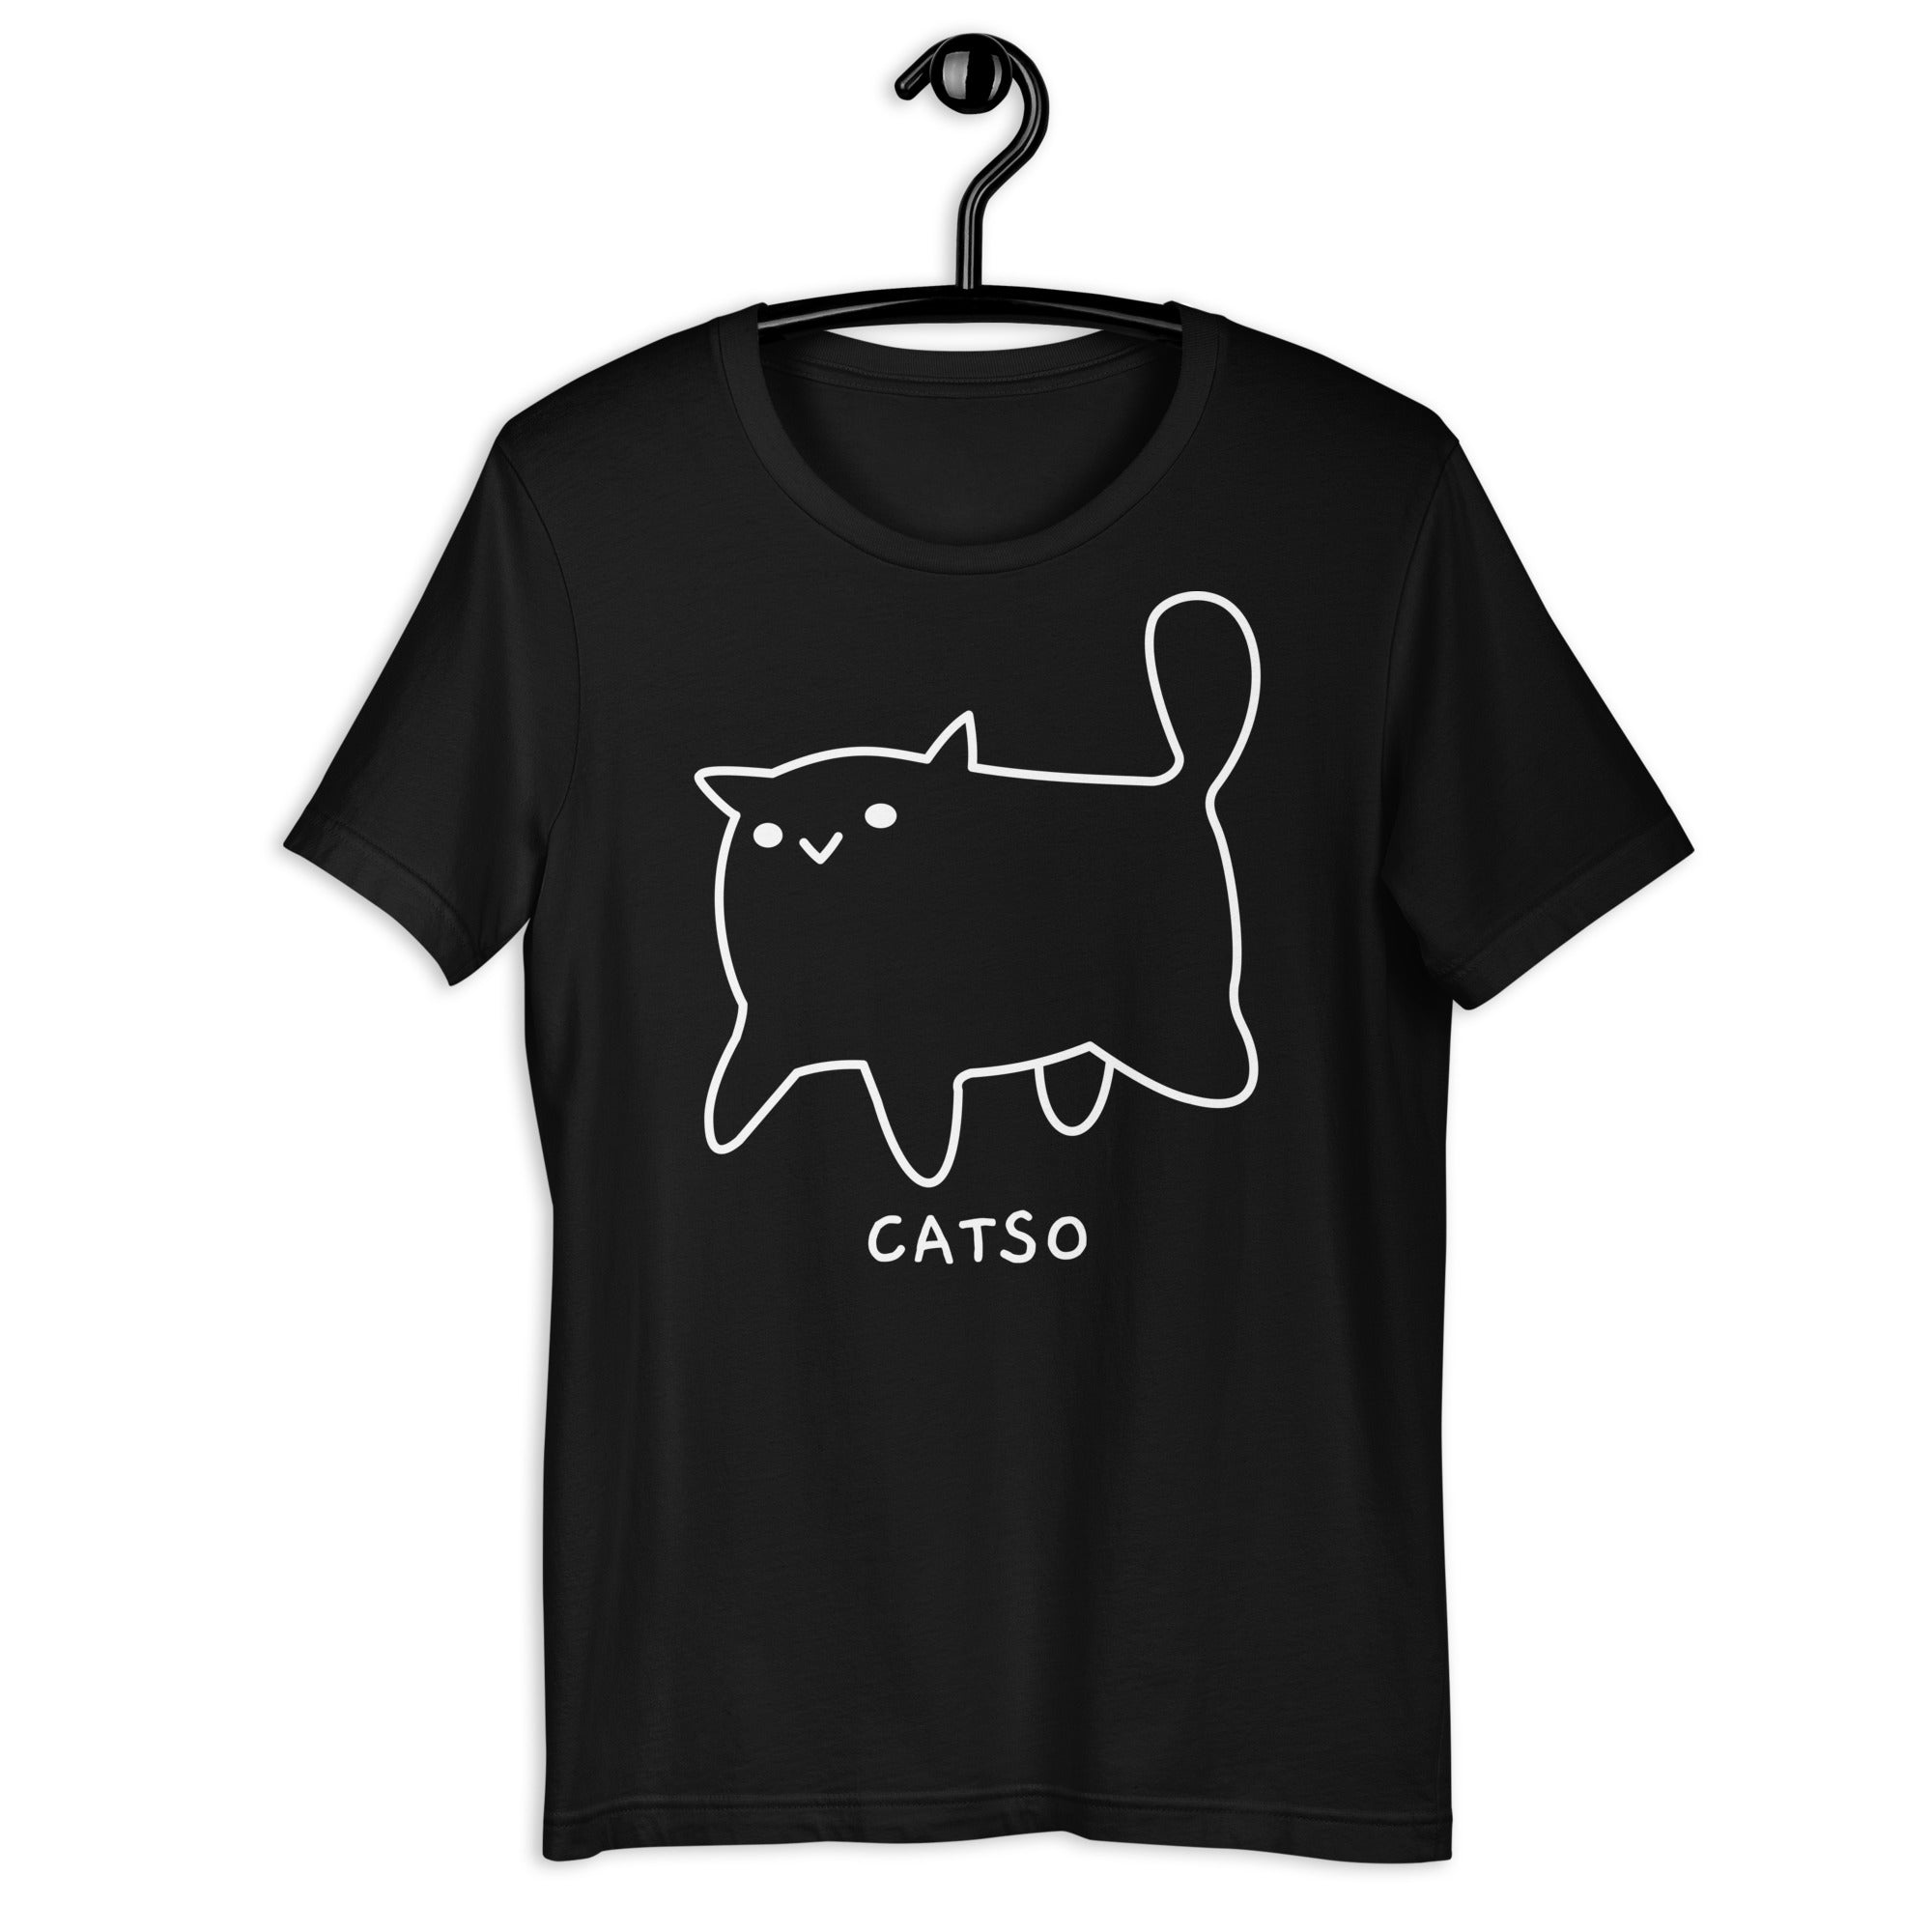 Catso the Badly Drawn Cat - Unisex T-Shirt